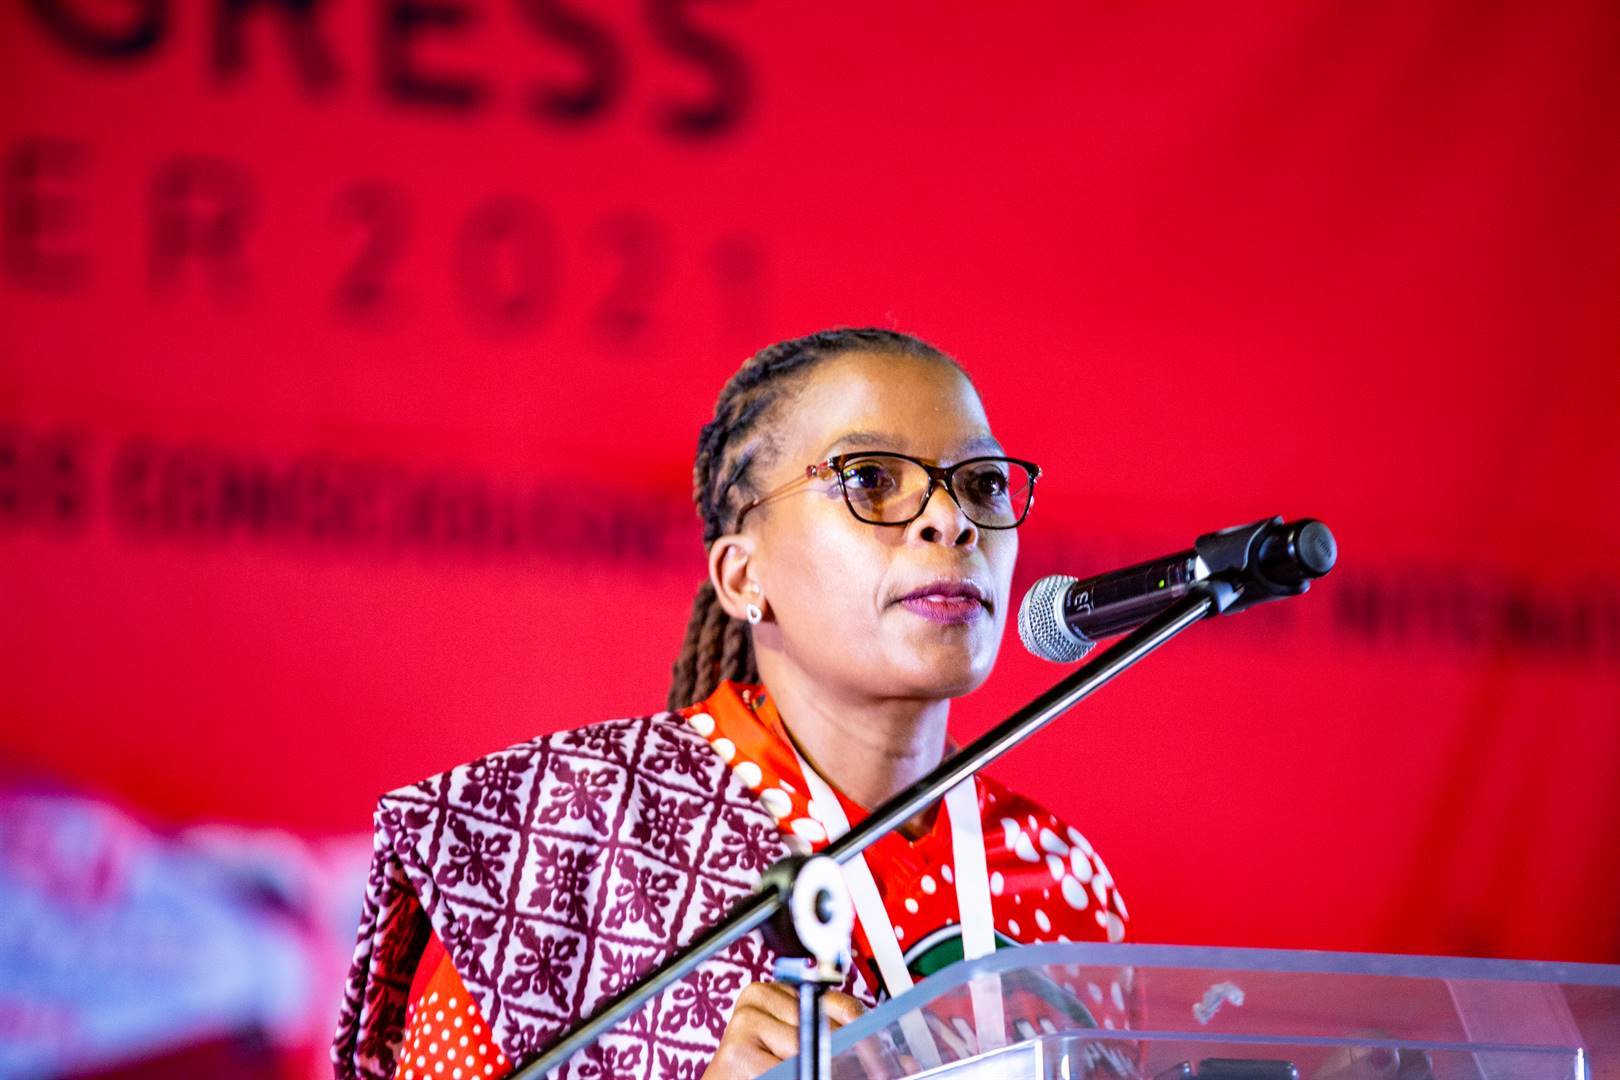 Cosatu's Zingiswa Losi said the Workers' Day event scheduled for Wednesday at Athlone Stadium in Cape Town was an opportunity to mobilise workers to vote for the ANC. (OJ Koloti/Gallo Images)